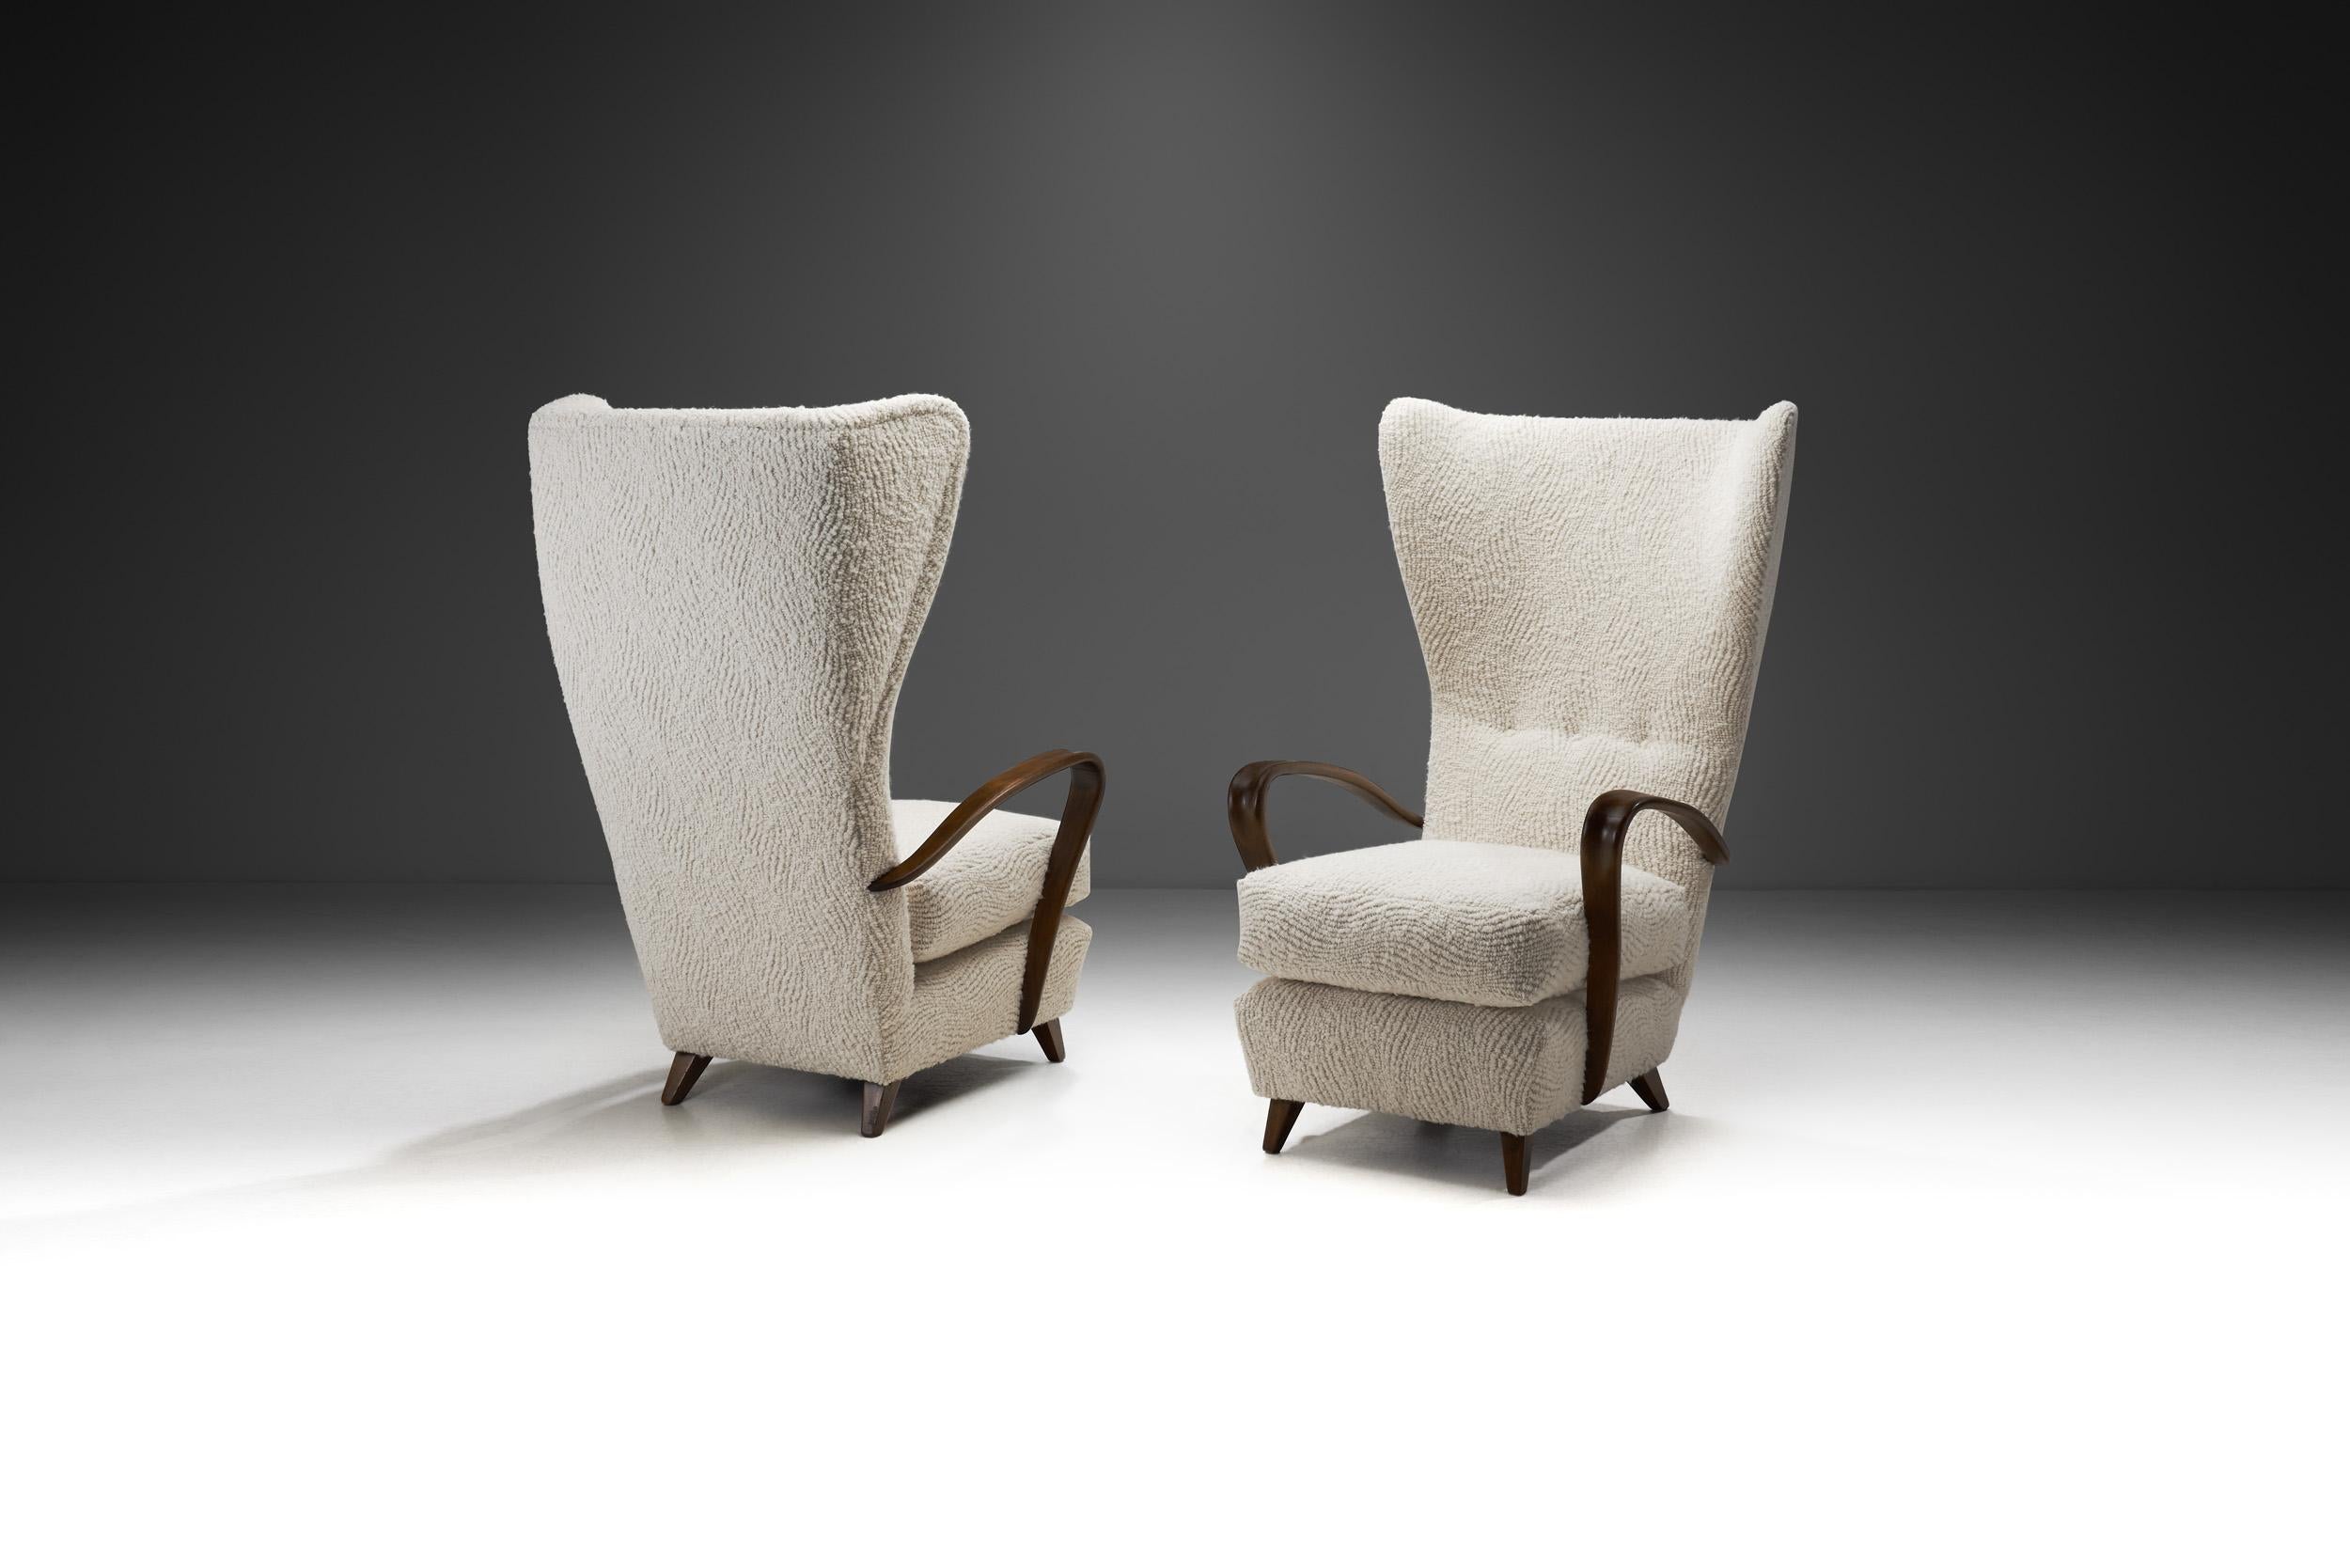 Mid-20th Century Italian Mid-Century Modern Wingback Chairs in Bouclé, Italy 1950s For Sale